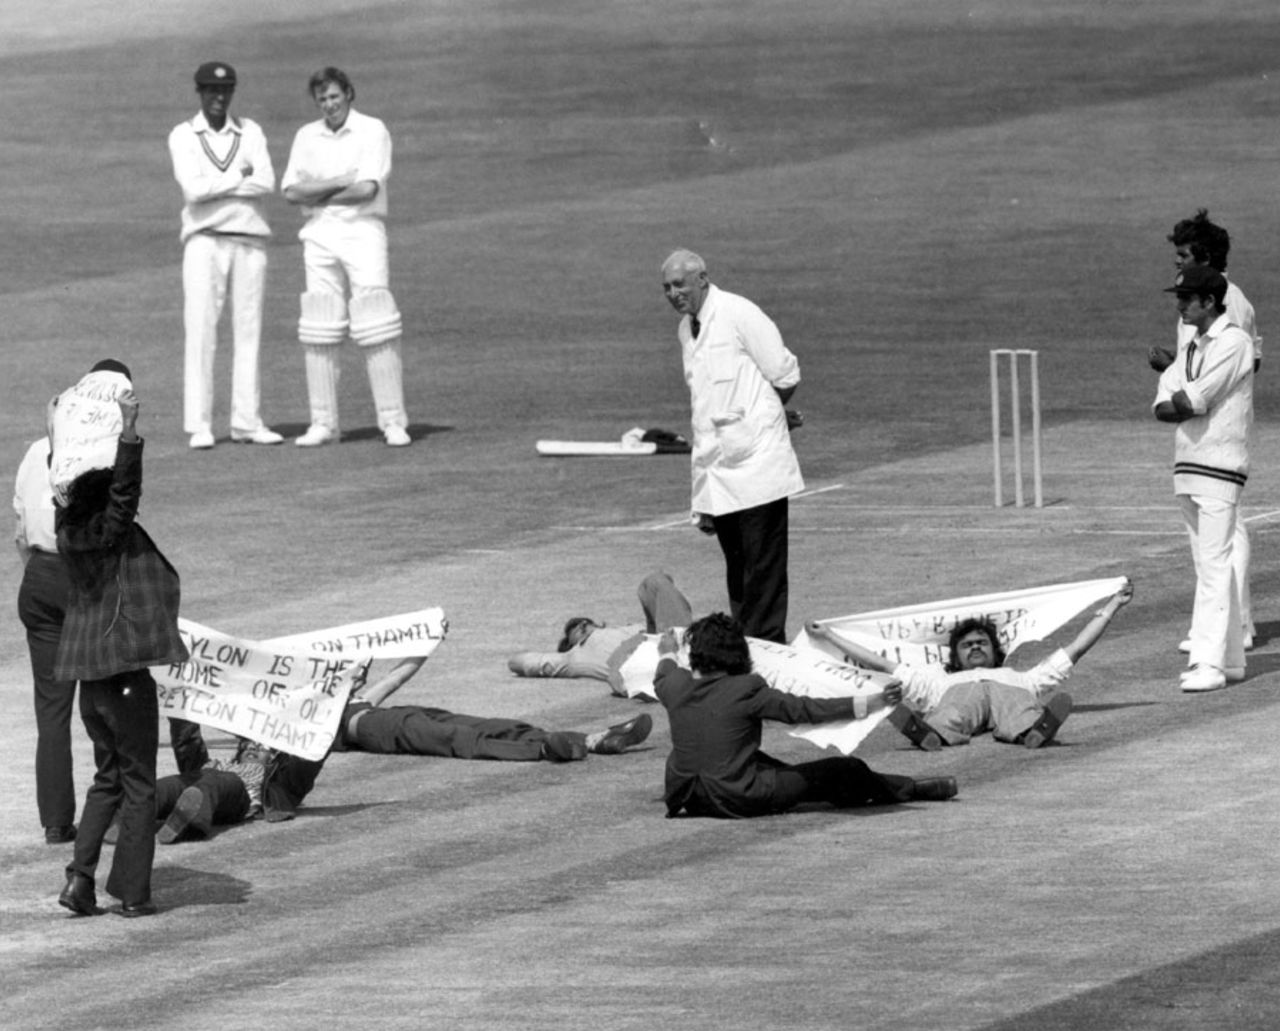 Demonstrators hold up the game by lying on the pitch, Australia v Sri Lanka, World Cup, The Oval, June 11, 1975